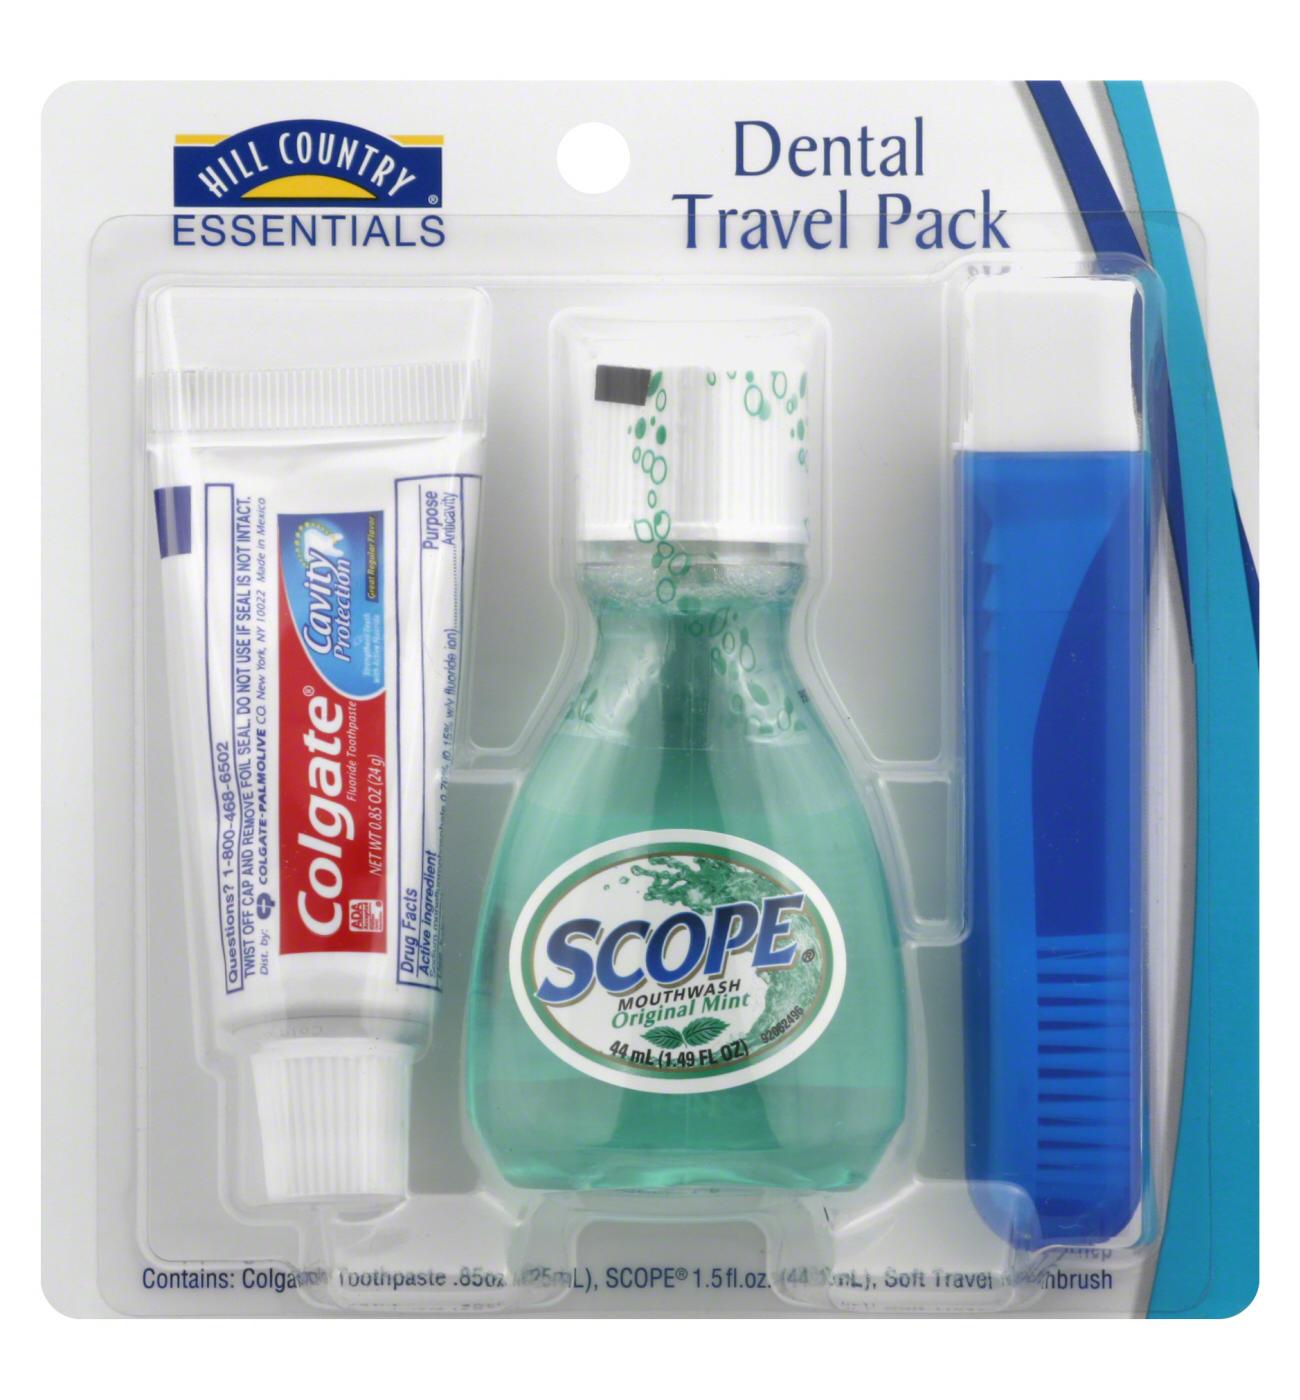 Hill Country Essentials Travel Size Dental Pack - Assorted; image 1 of 5